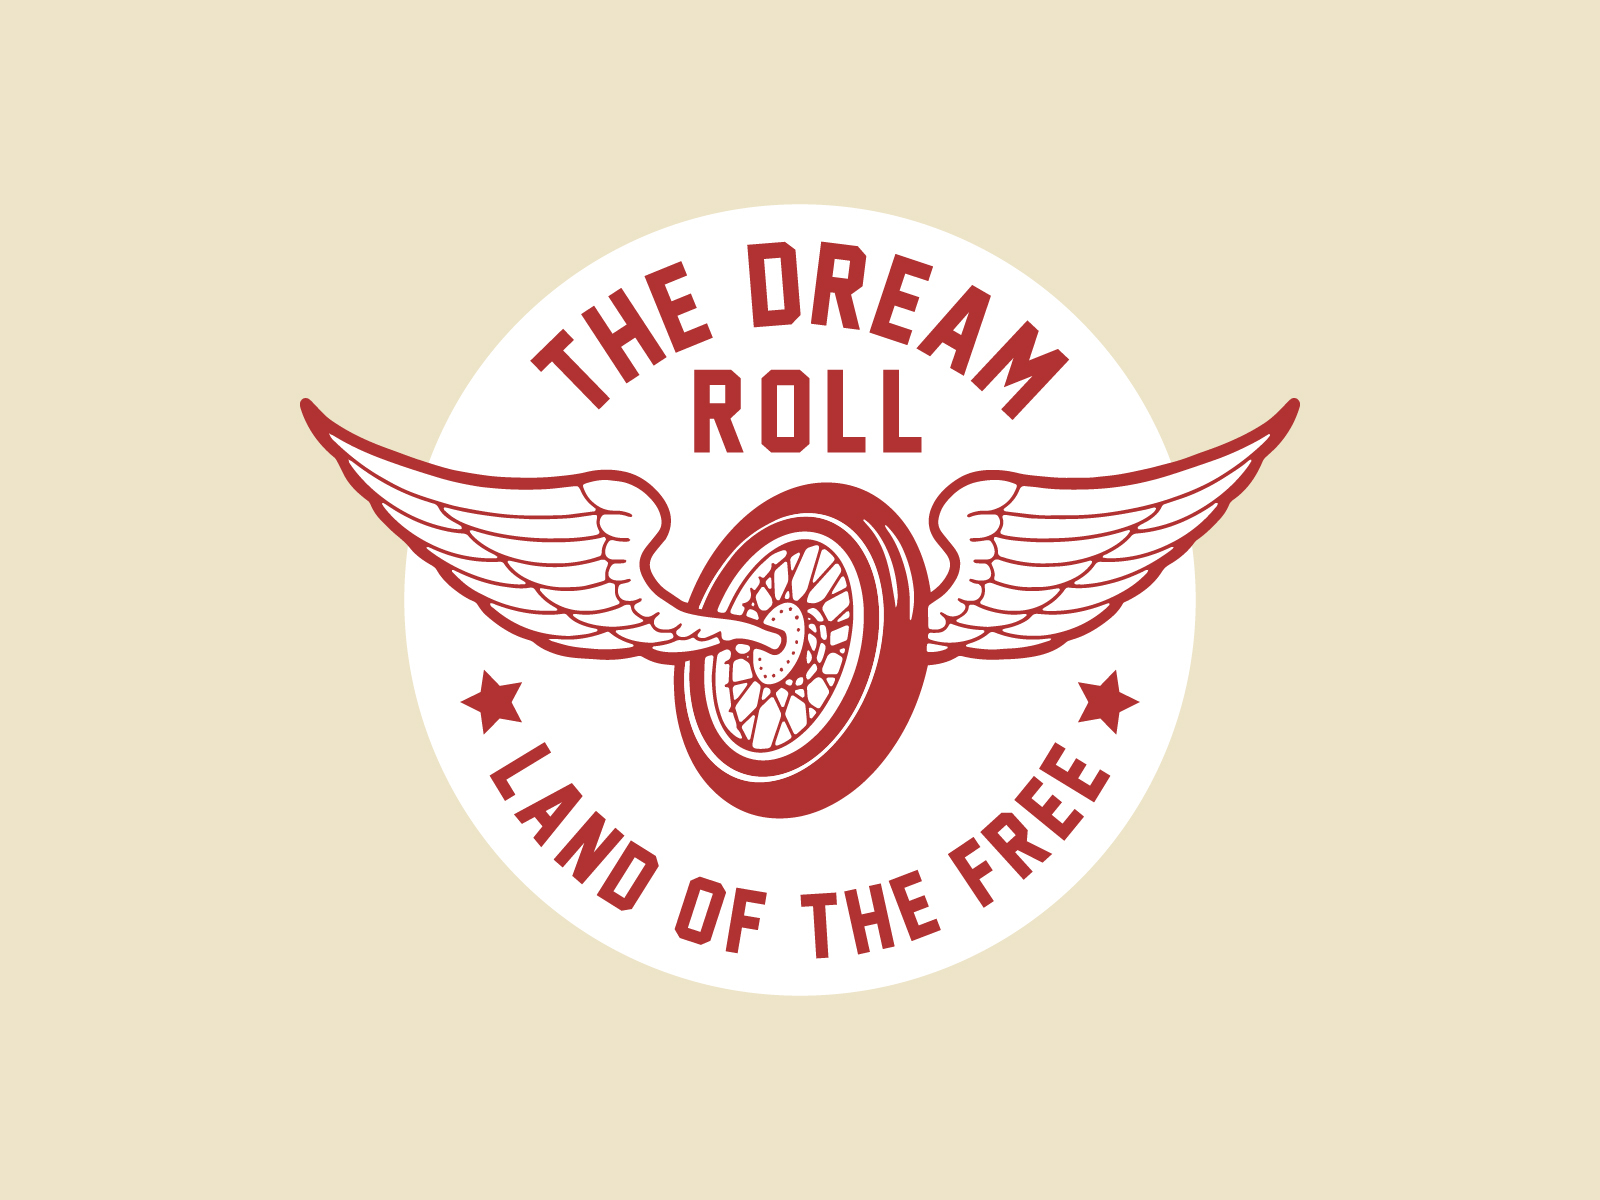 The Dream Roll Wing Badge Logo by Mickey Graham on Dribbble